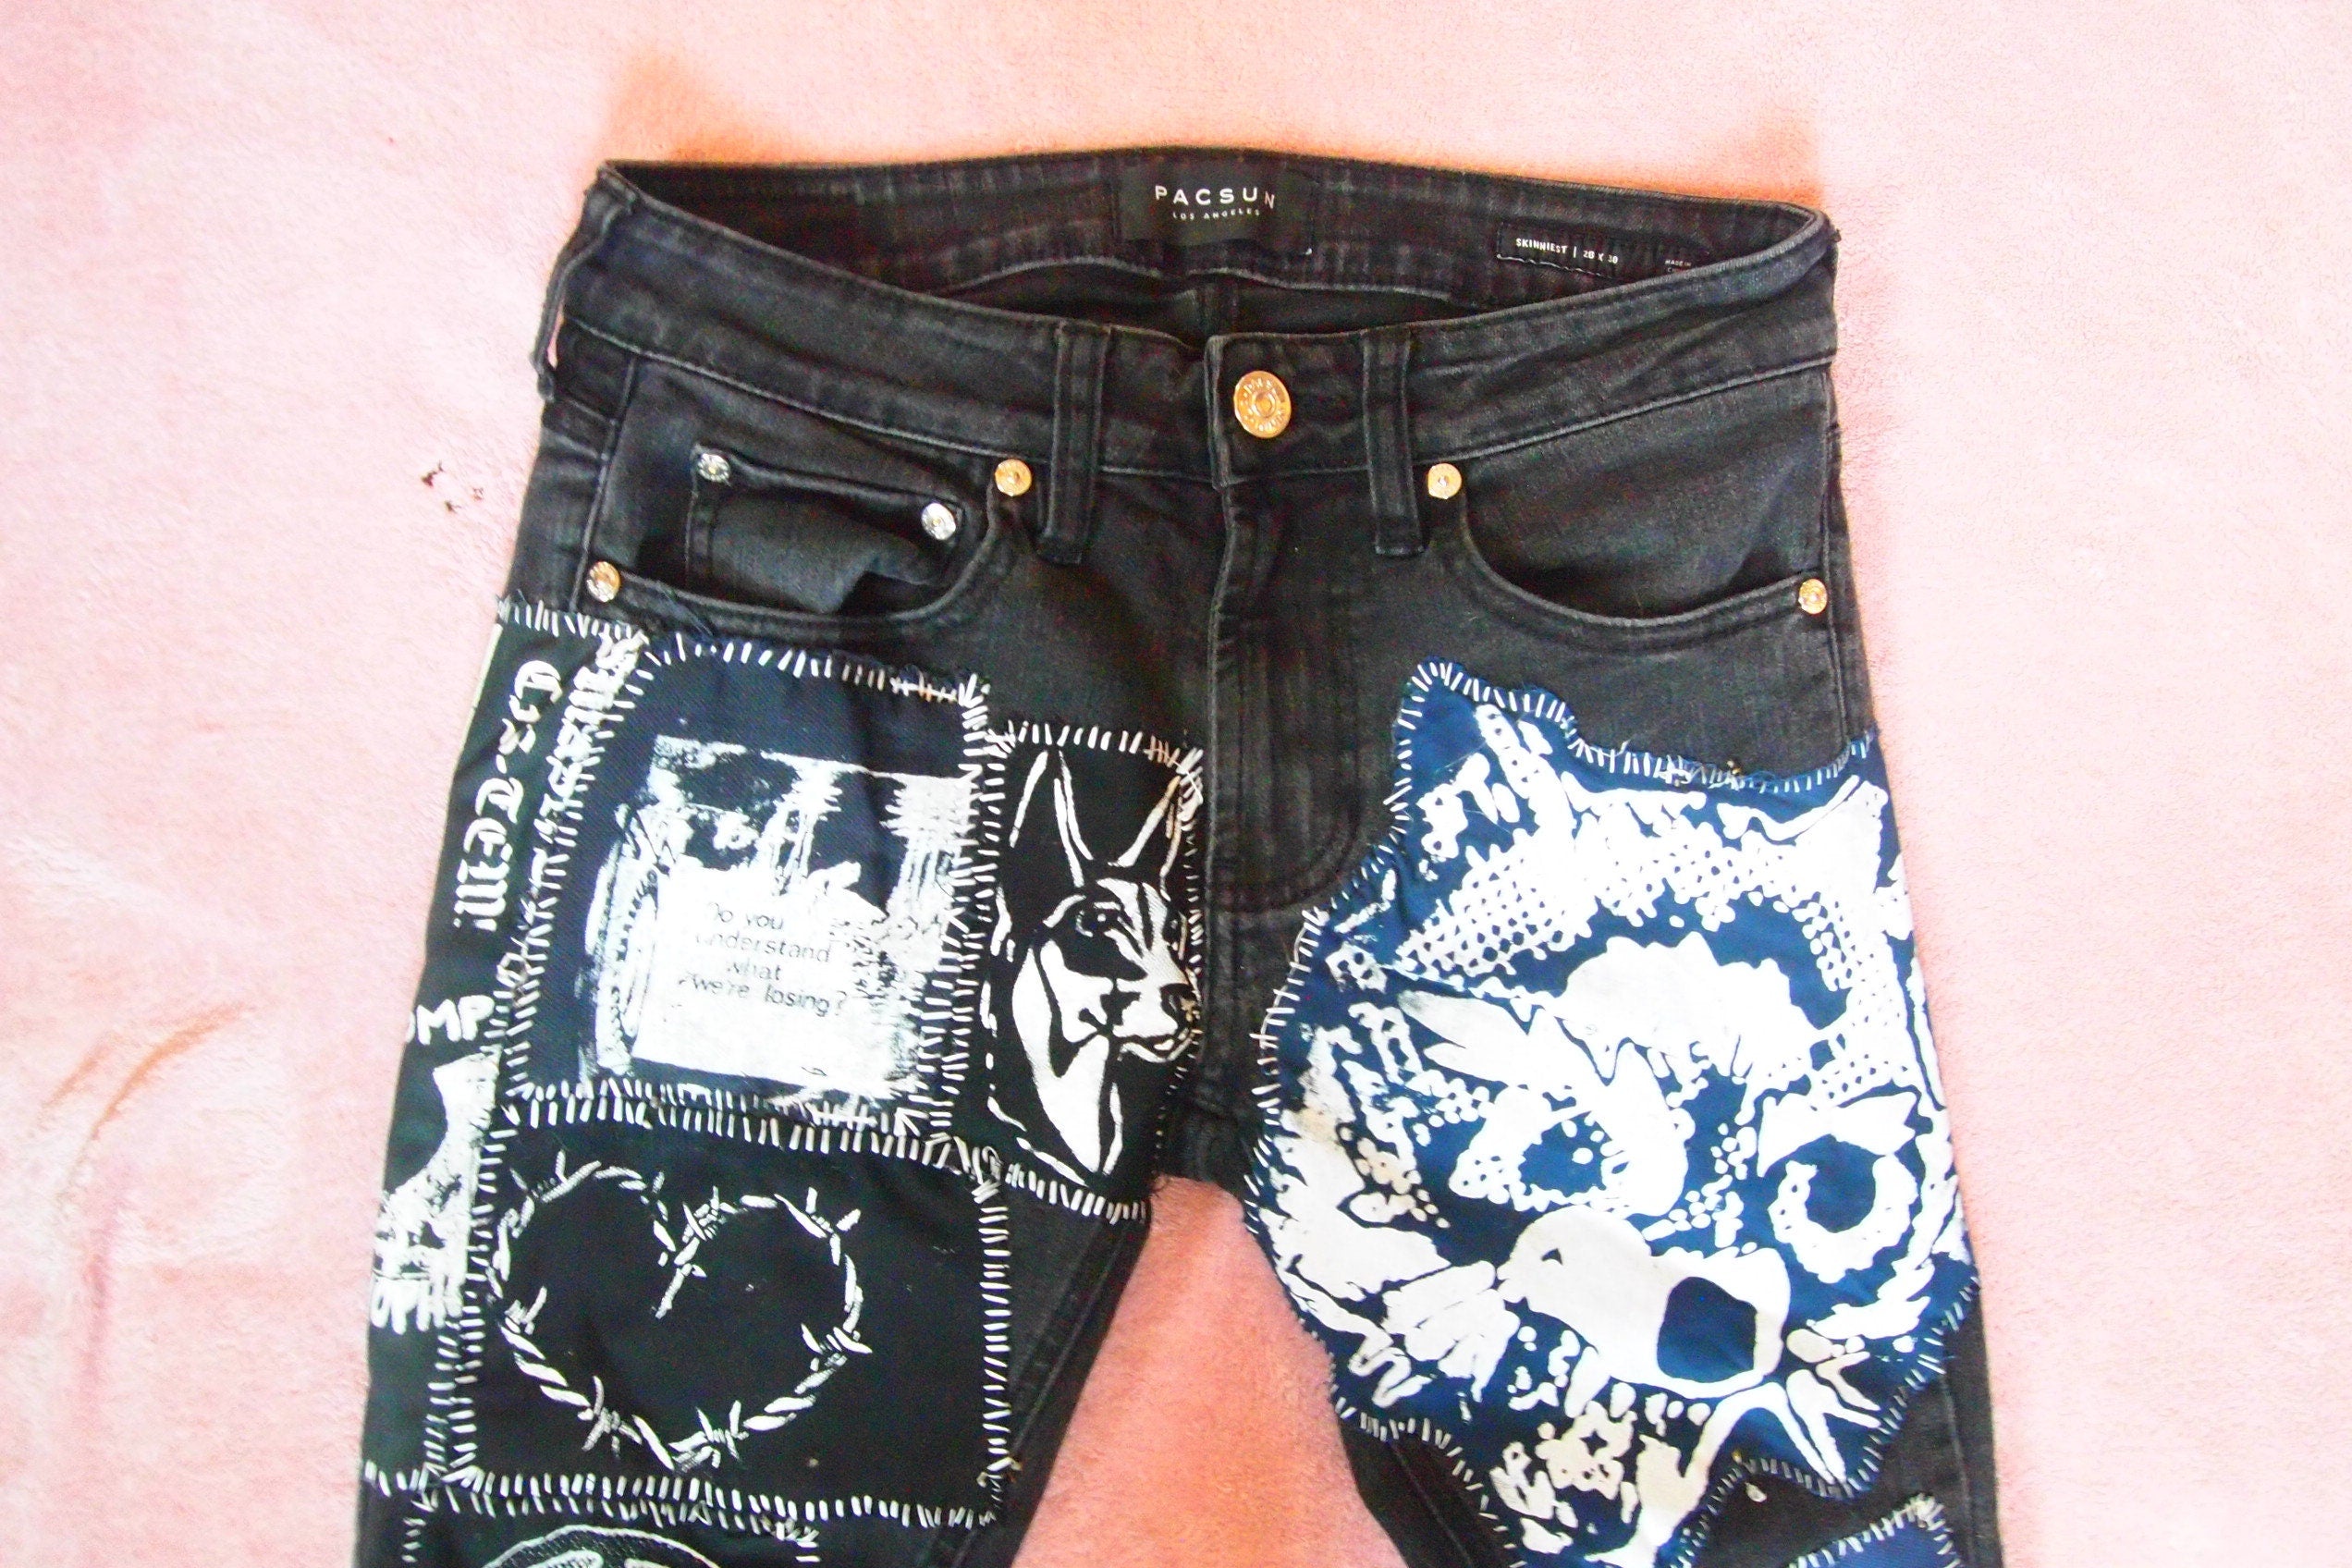 Custom Patches for Jeans and More - Etsy